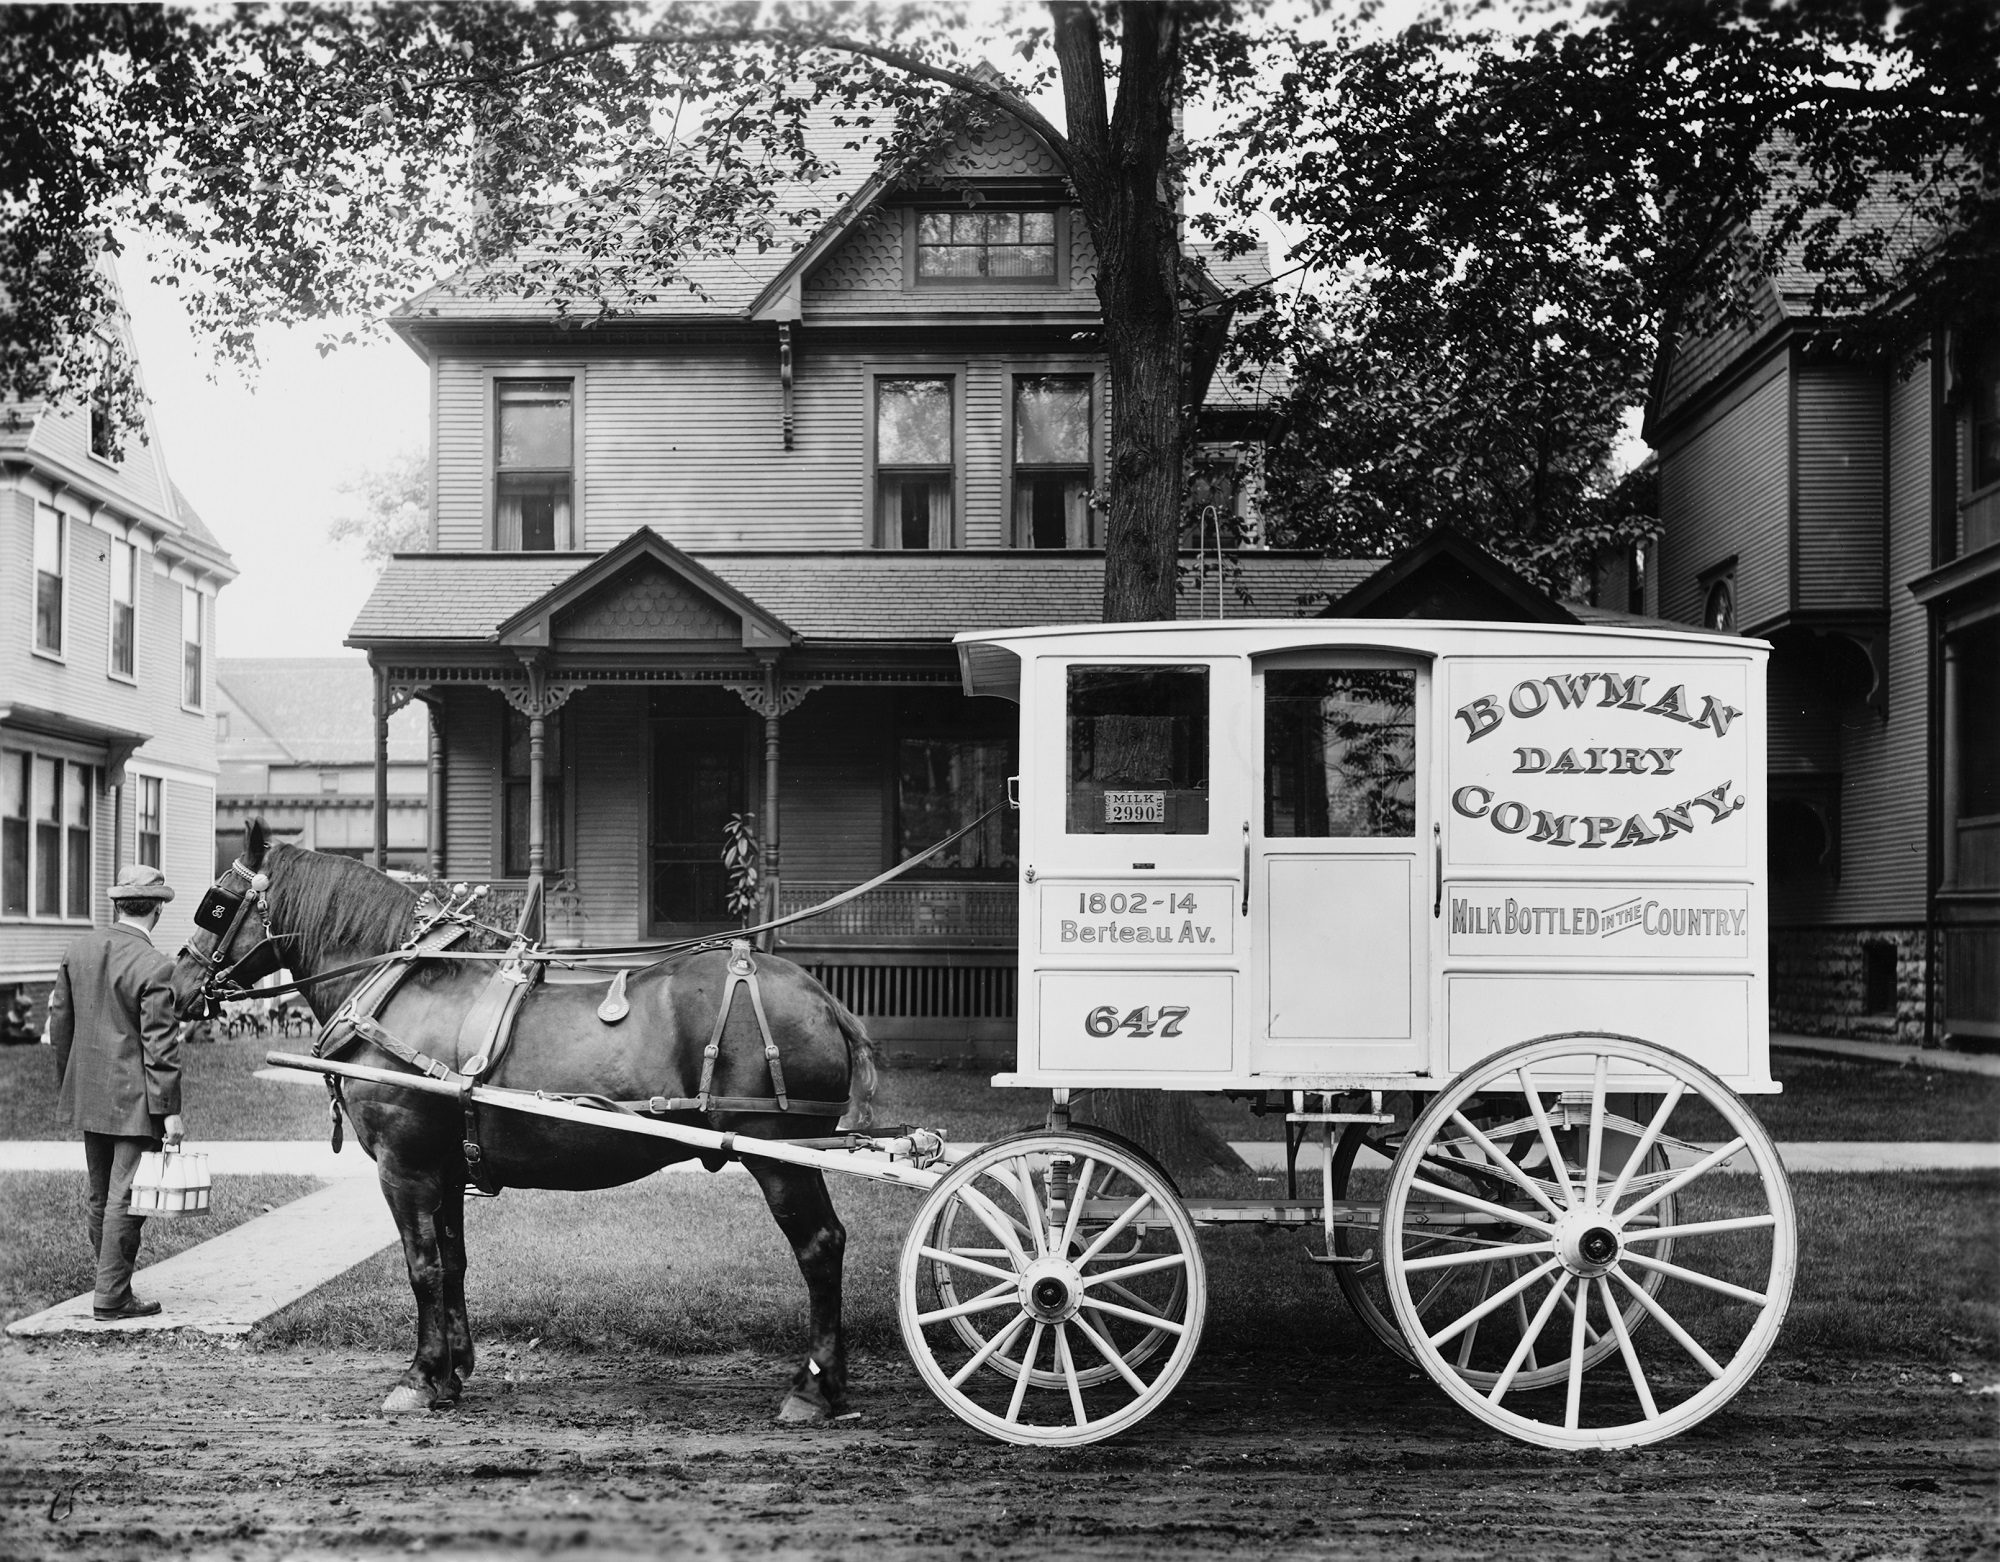 Milkman delivering milk for the Bowman Dairy Company using a horse-drawn milk delivery wagon on a residential street, Chicago, Illinois, 1914.